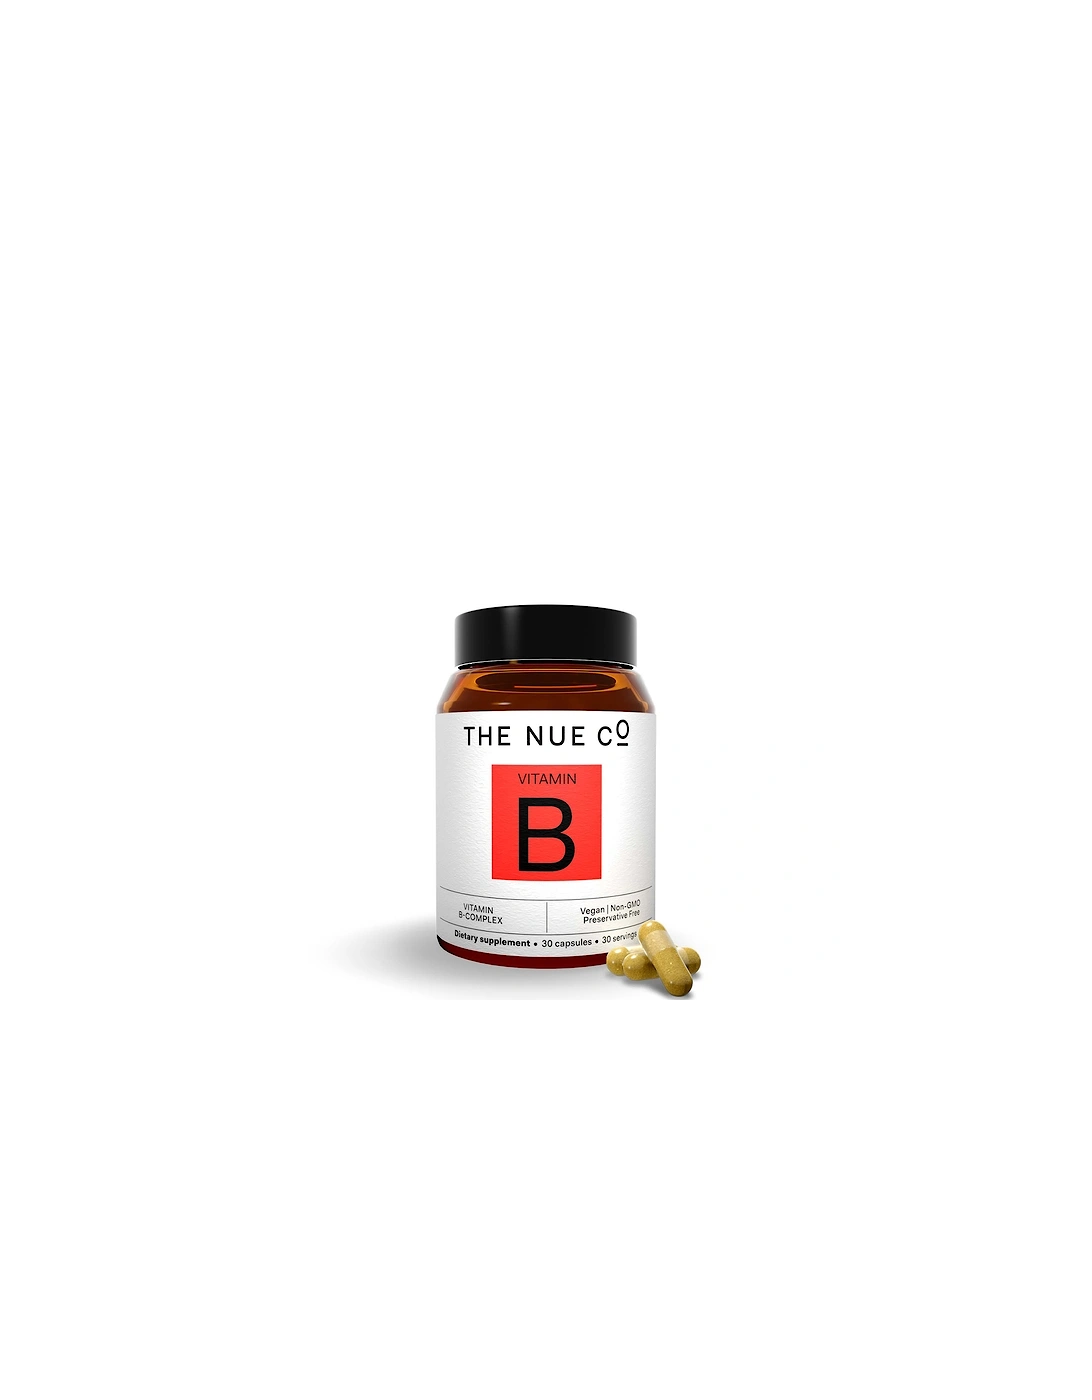 The Nue Co. Vitamin B Supplement To Improve Energy (30 Capsules), 2 of 1